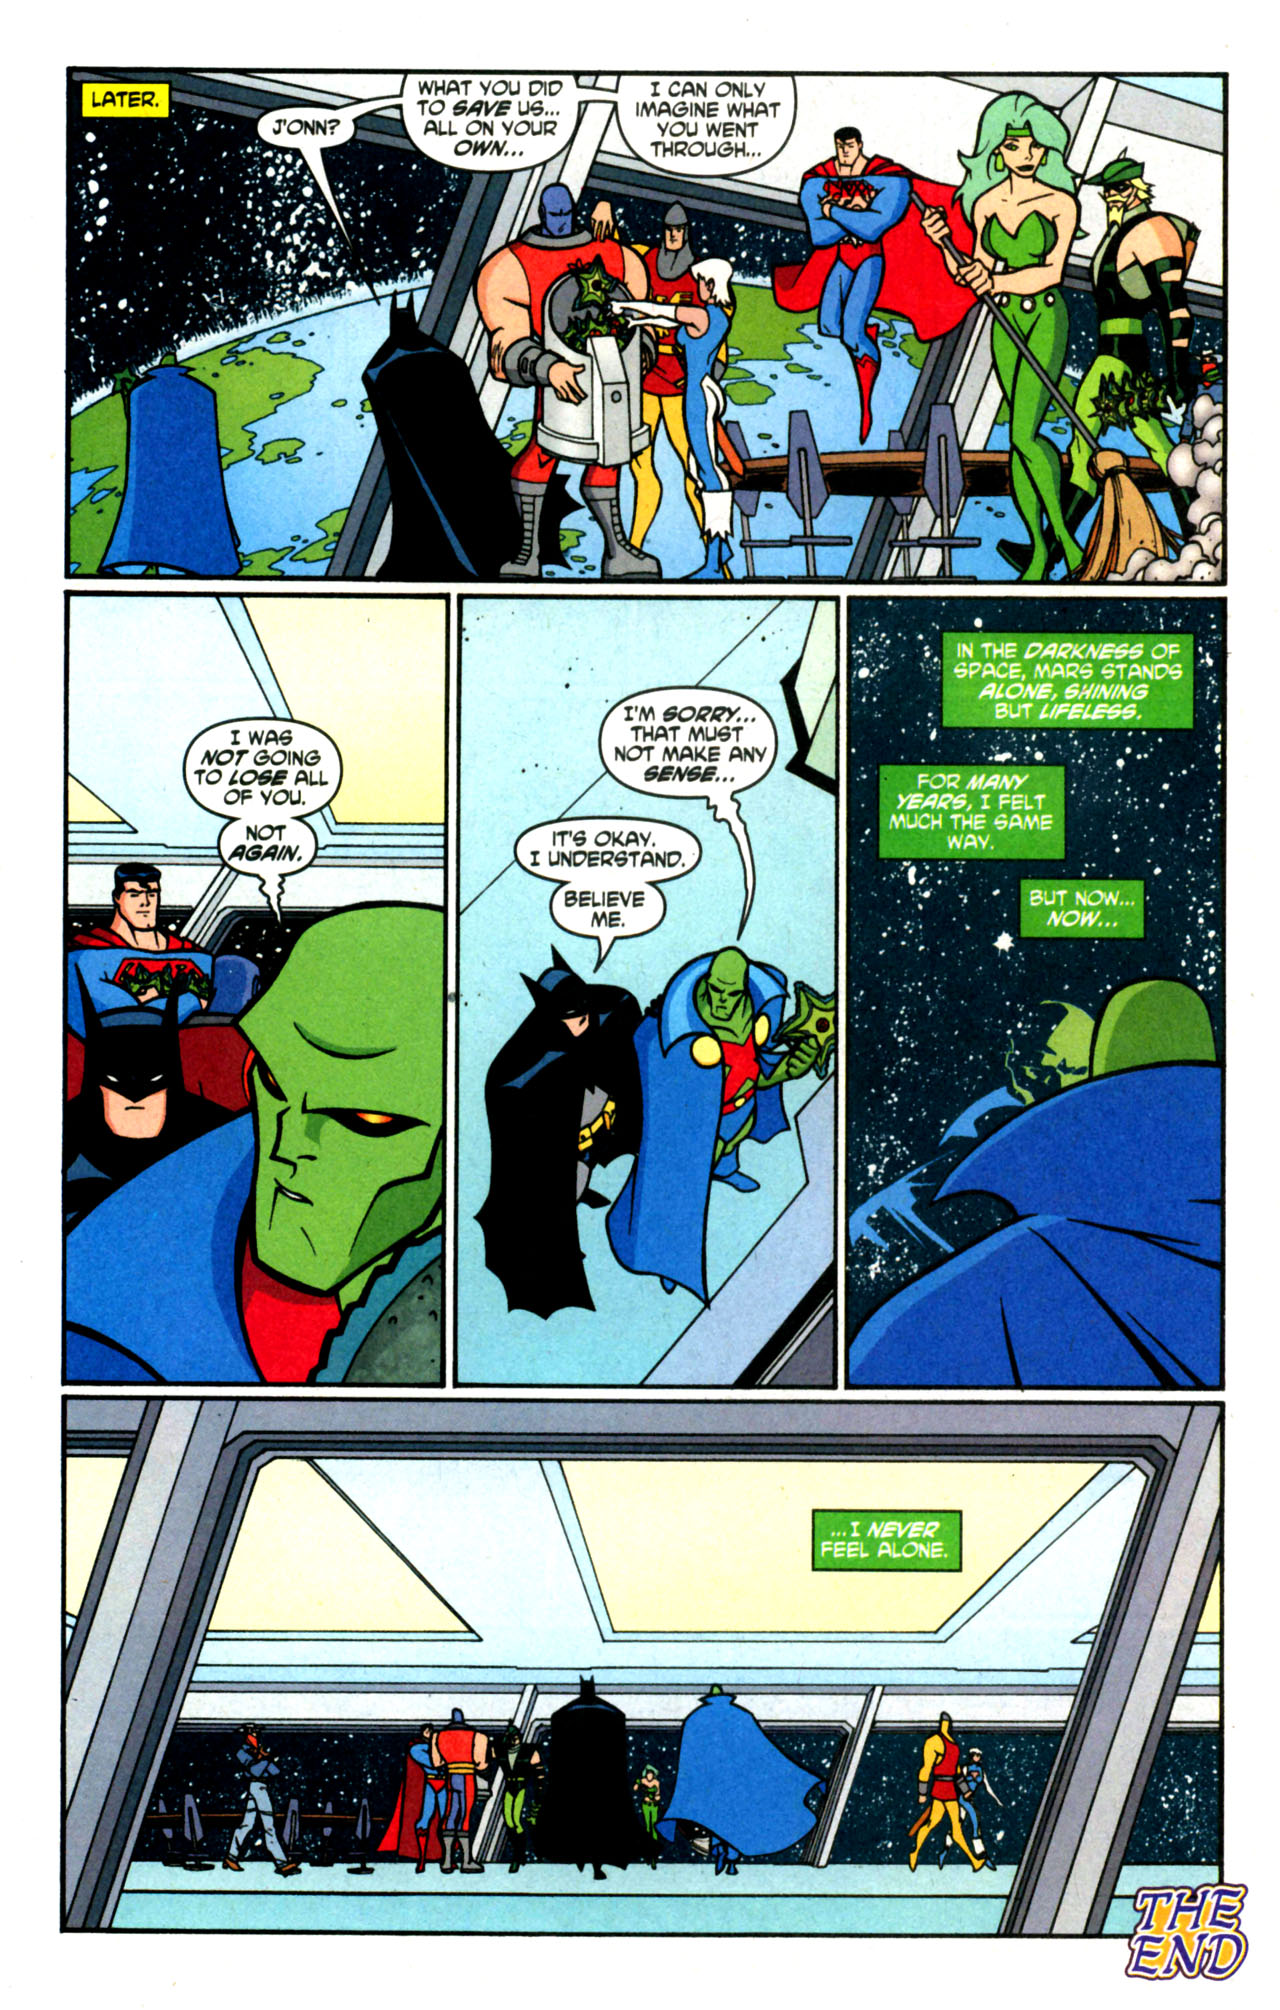 Justice League Unlimited Issue 24 | Read Justice League Unlimited Issue 24 comic online in high ...